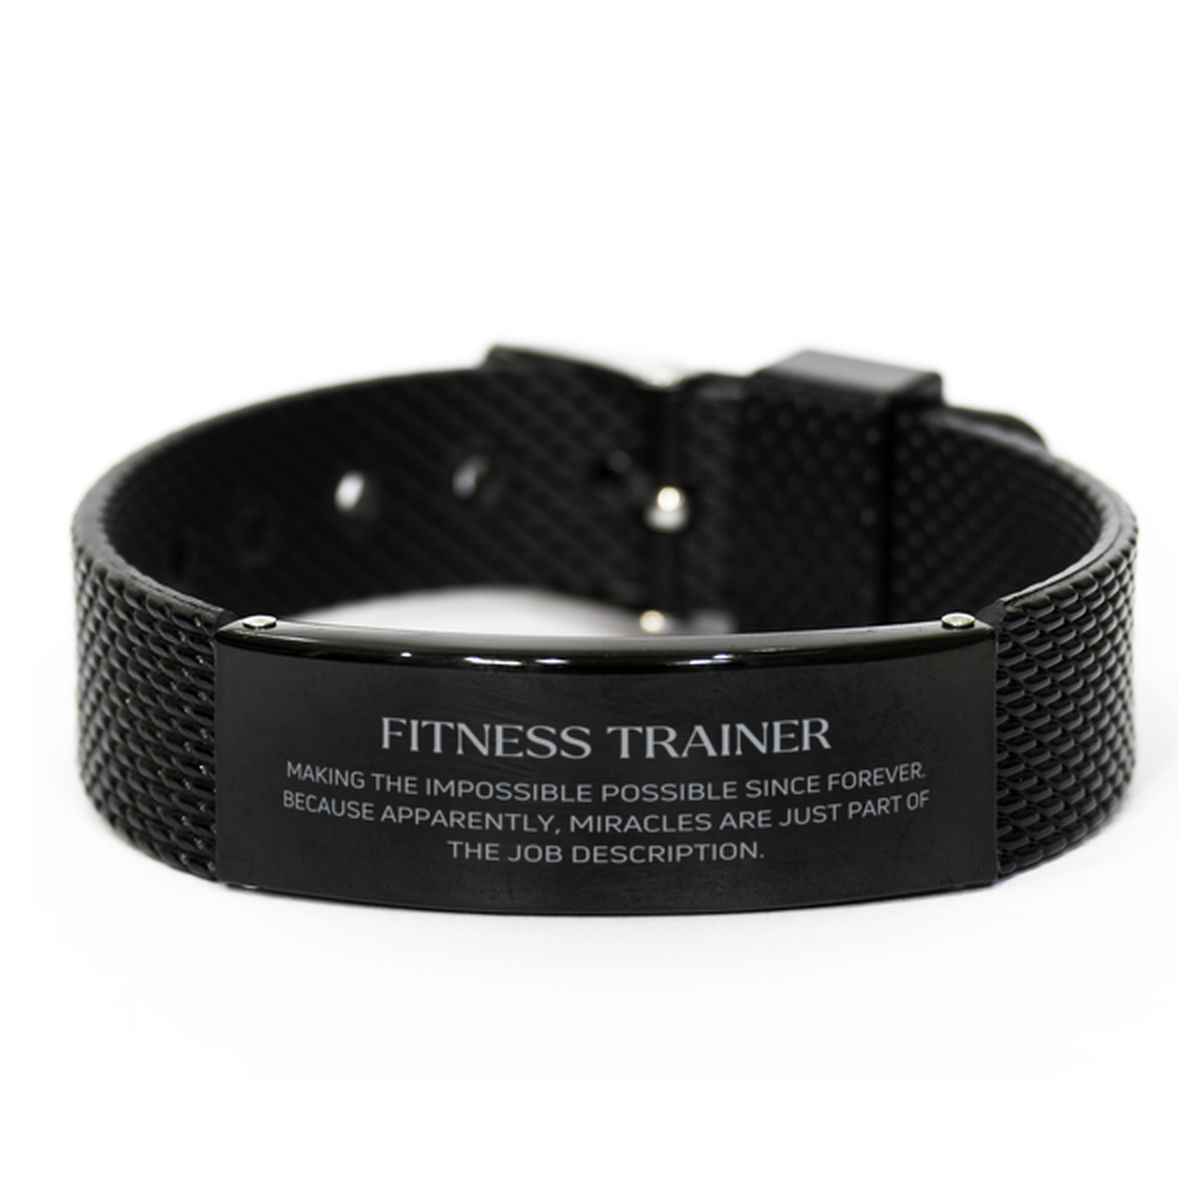 Funny Fitness Trainer Gifts, Miracles are just part of the job description, Inspirational Birthday Black Shark Mesh Bracelet For Fitness Trainer, Men, Women, Coworkers, Friends, Boss